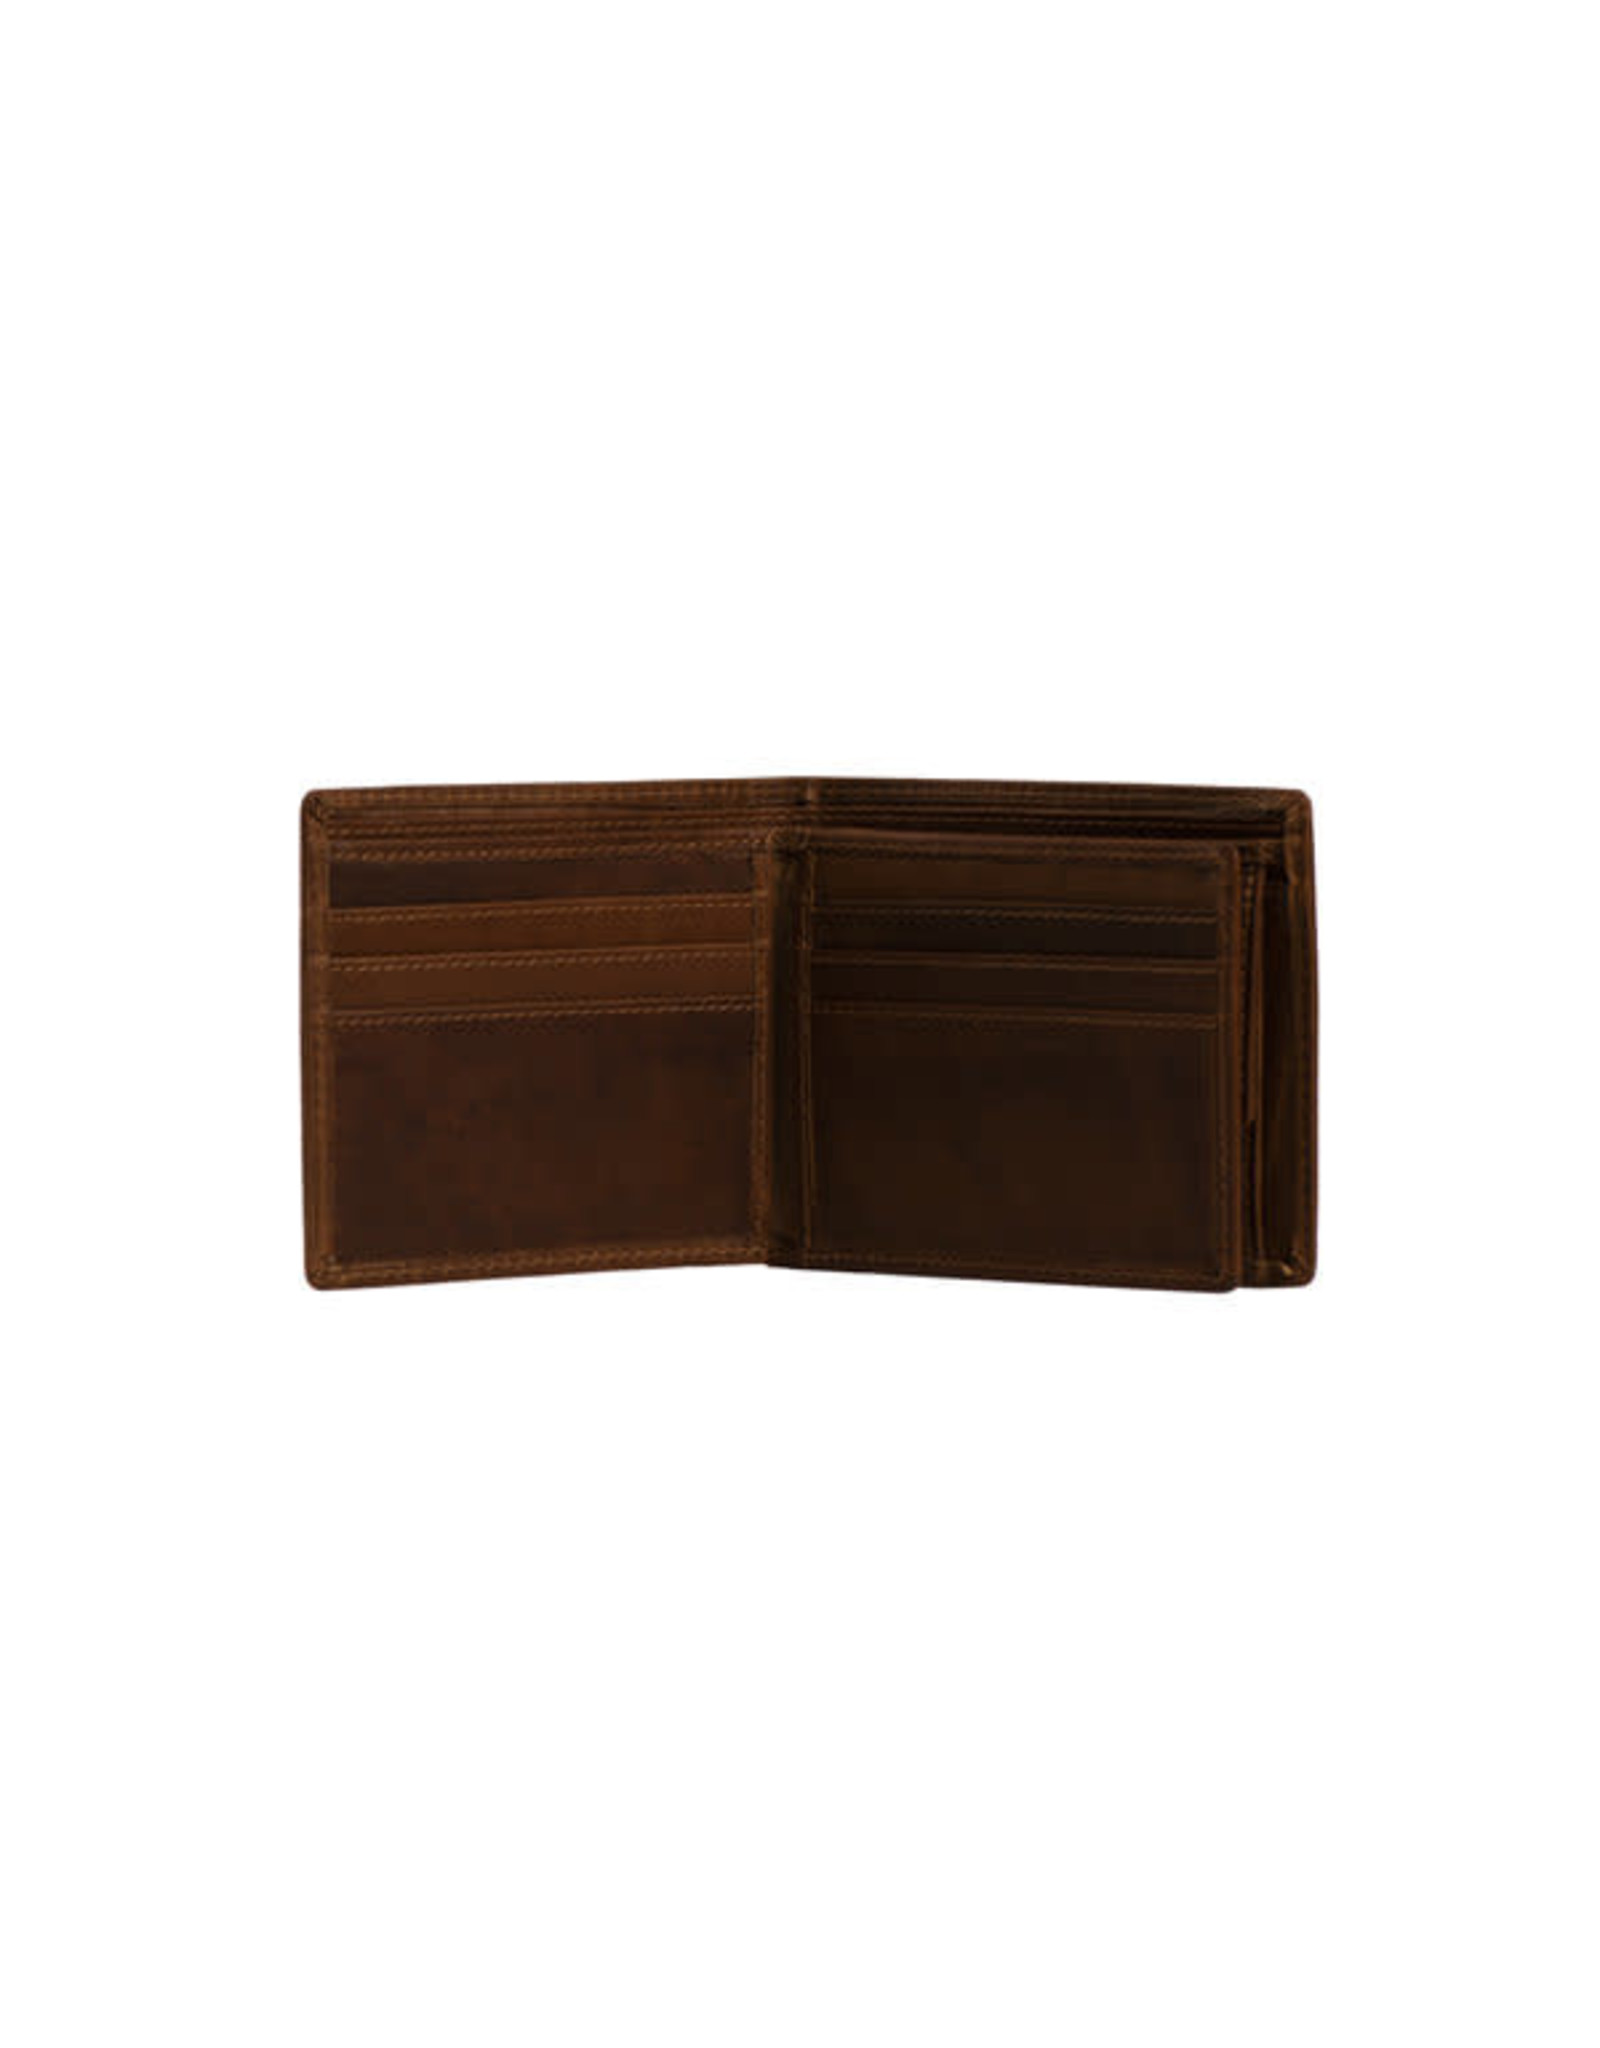 Chesterfield The Chesterfield Brand Wallet Ralph